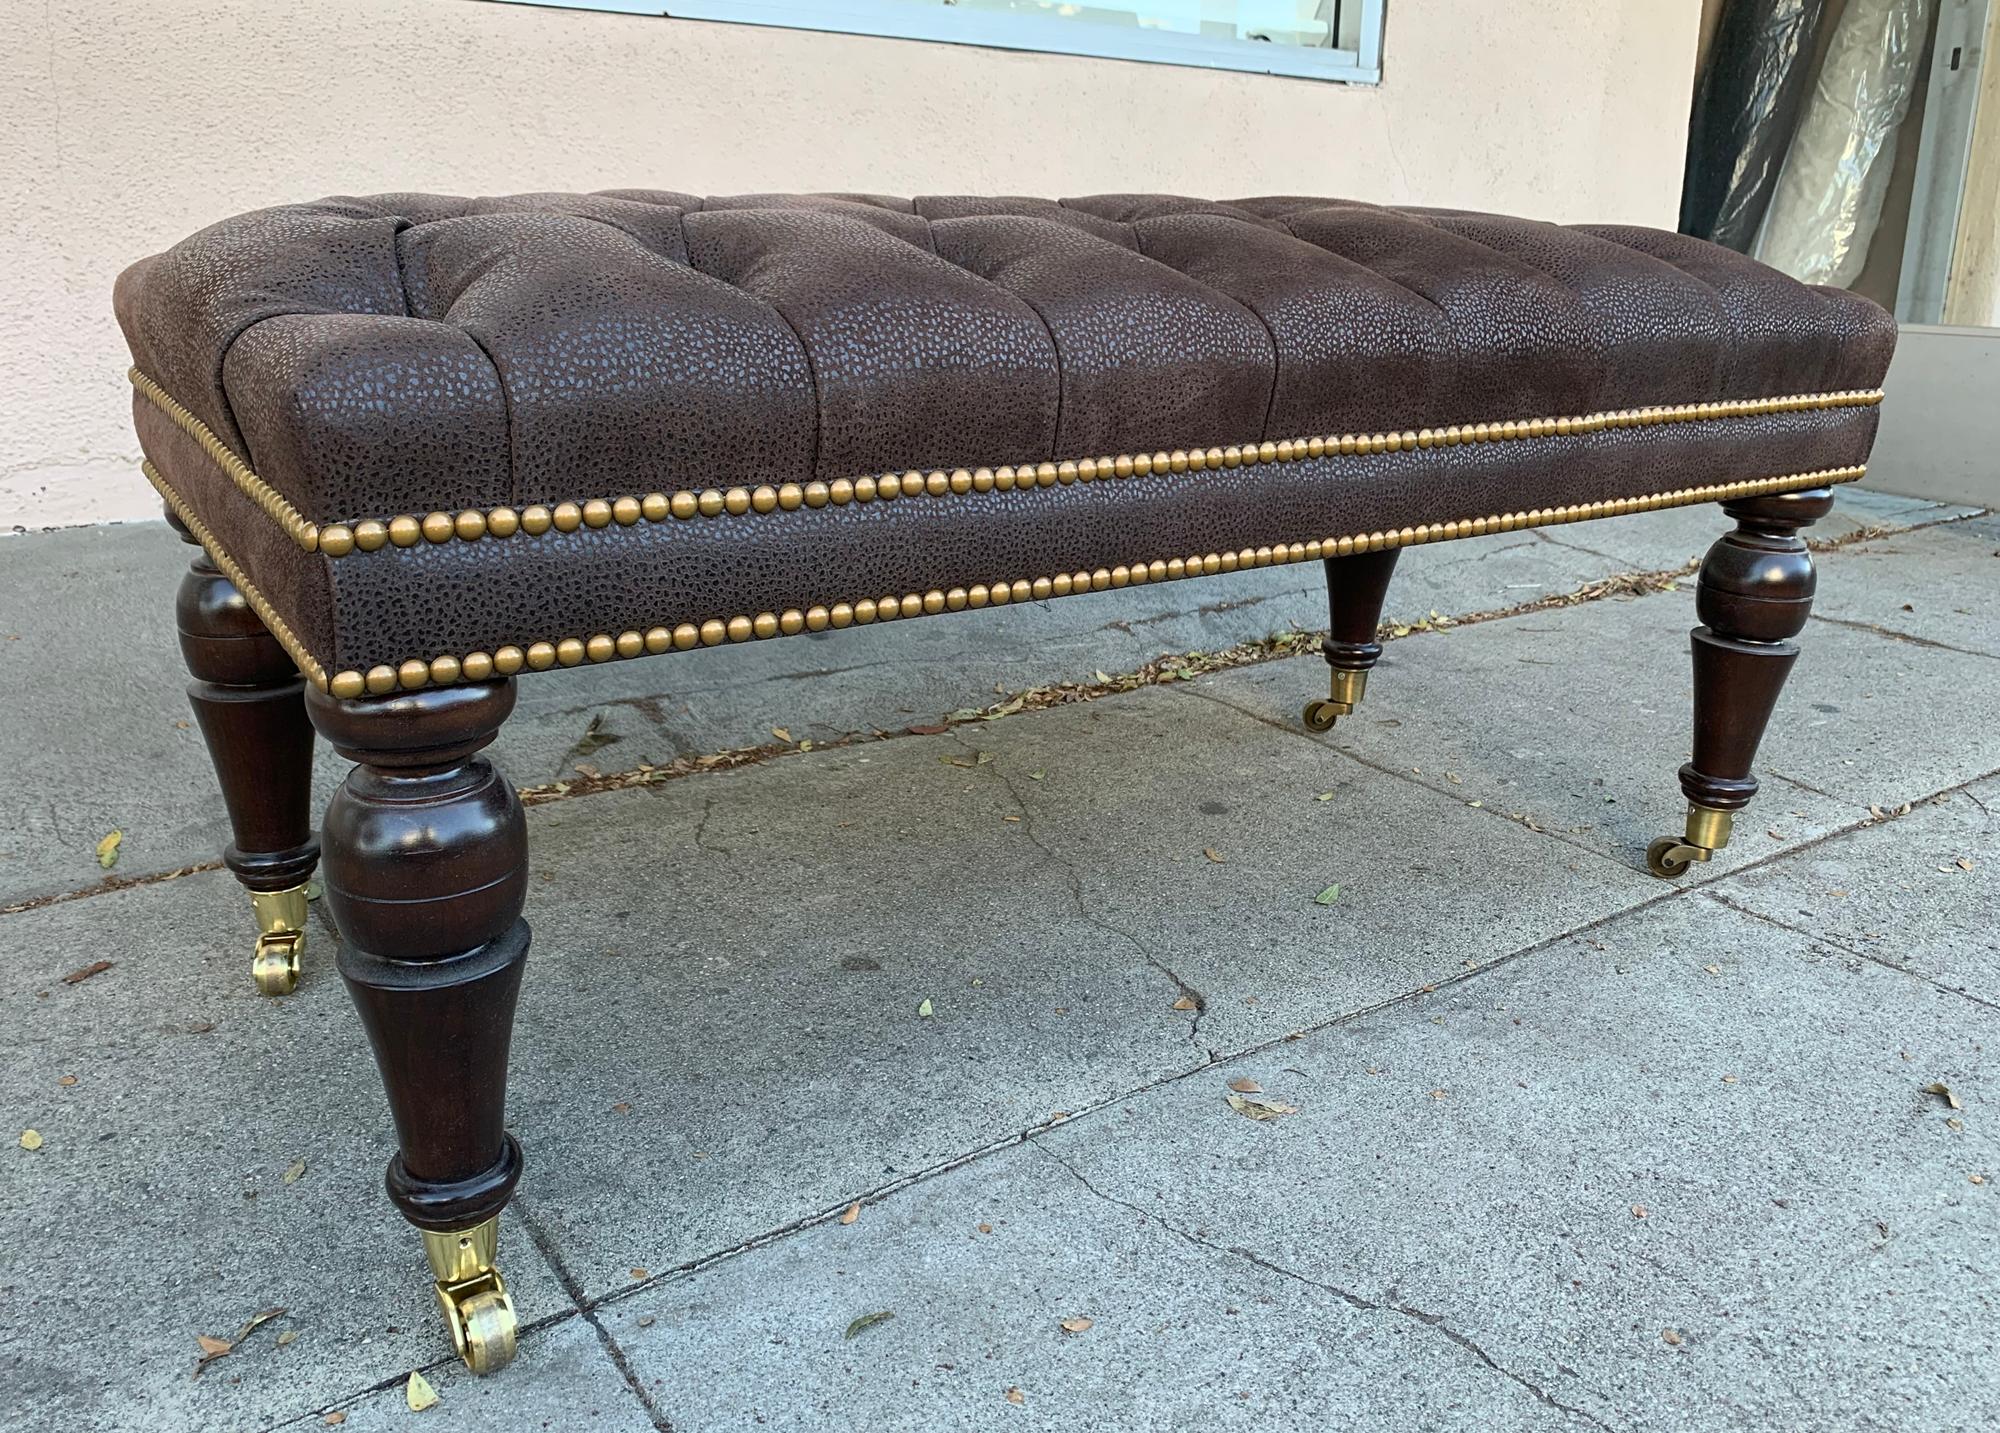 Beautiful English style bench with deep tufted leather upholstery and nailhead trimming, the legs are in a dark brown finish, the bench is in casters and is very easy to move, the bench is newly upholstered and refinished and is ready to be